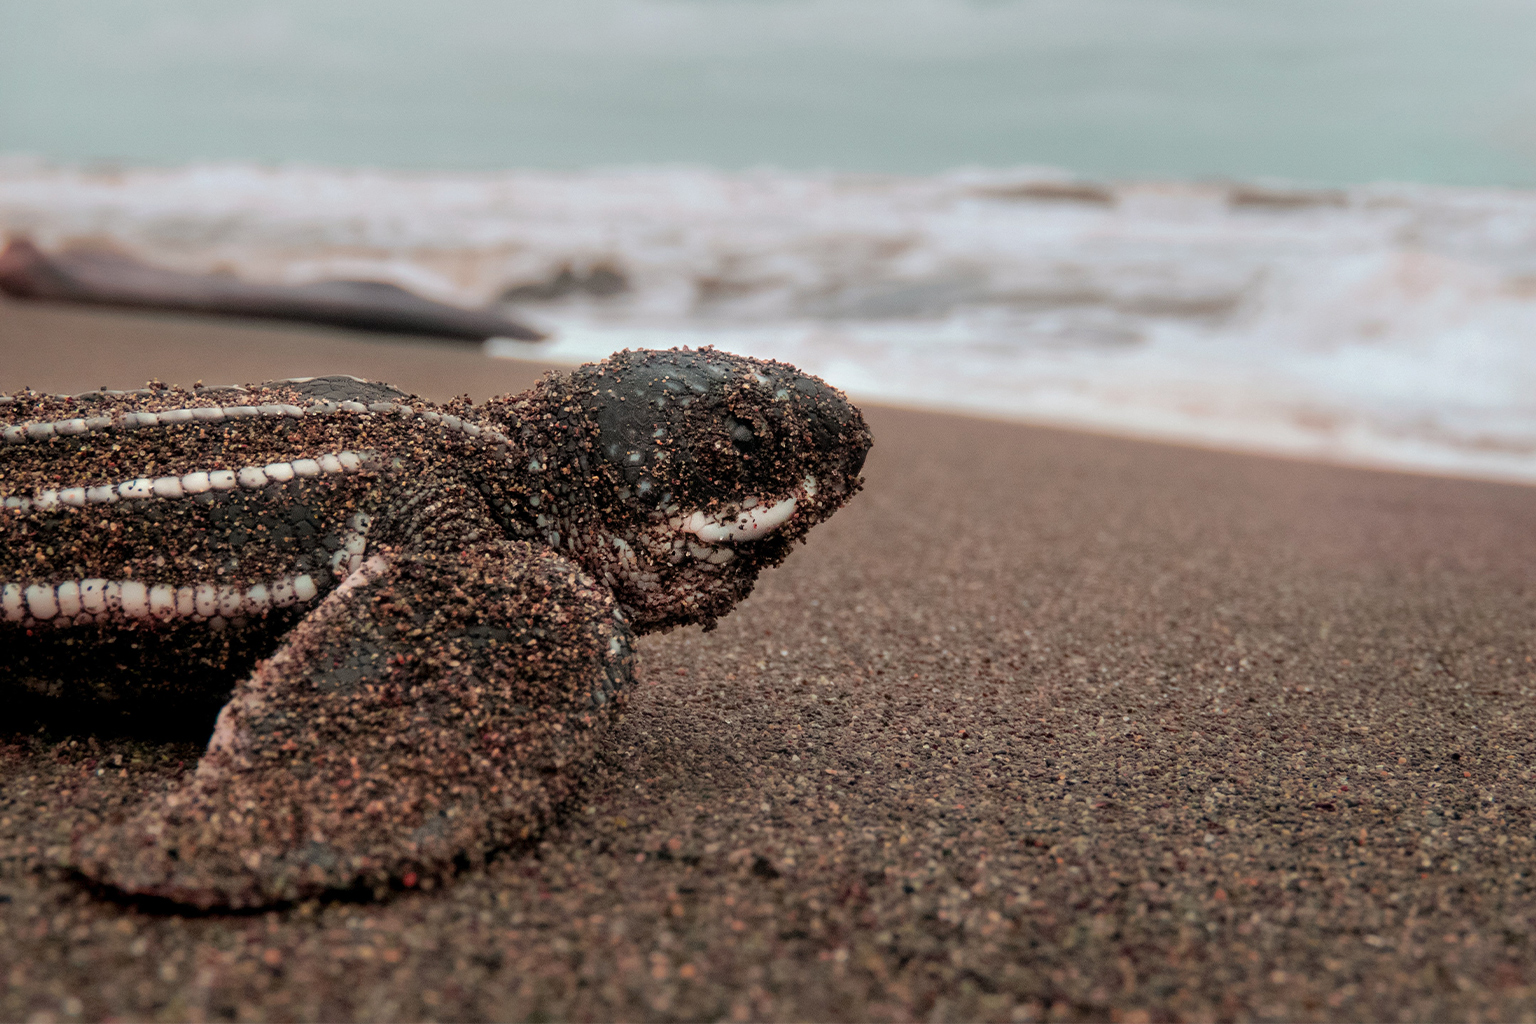 A leatherback turtle hatchling on a beach.